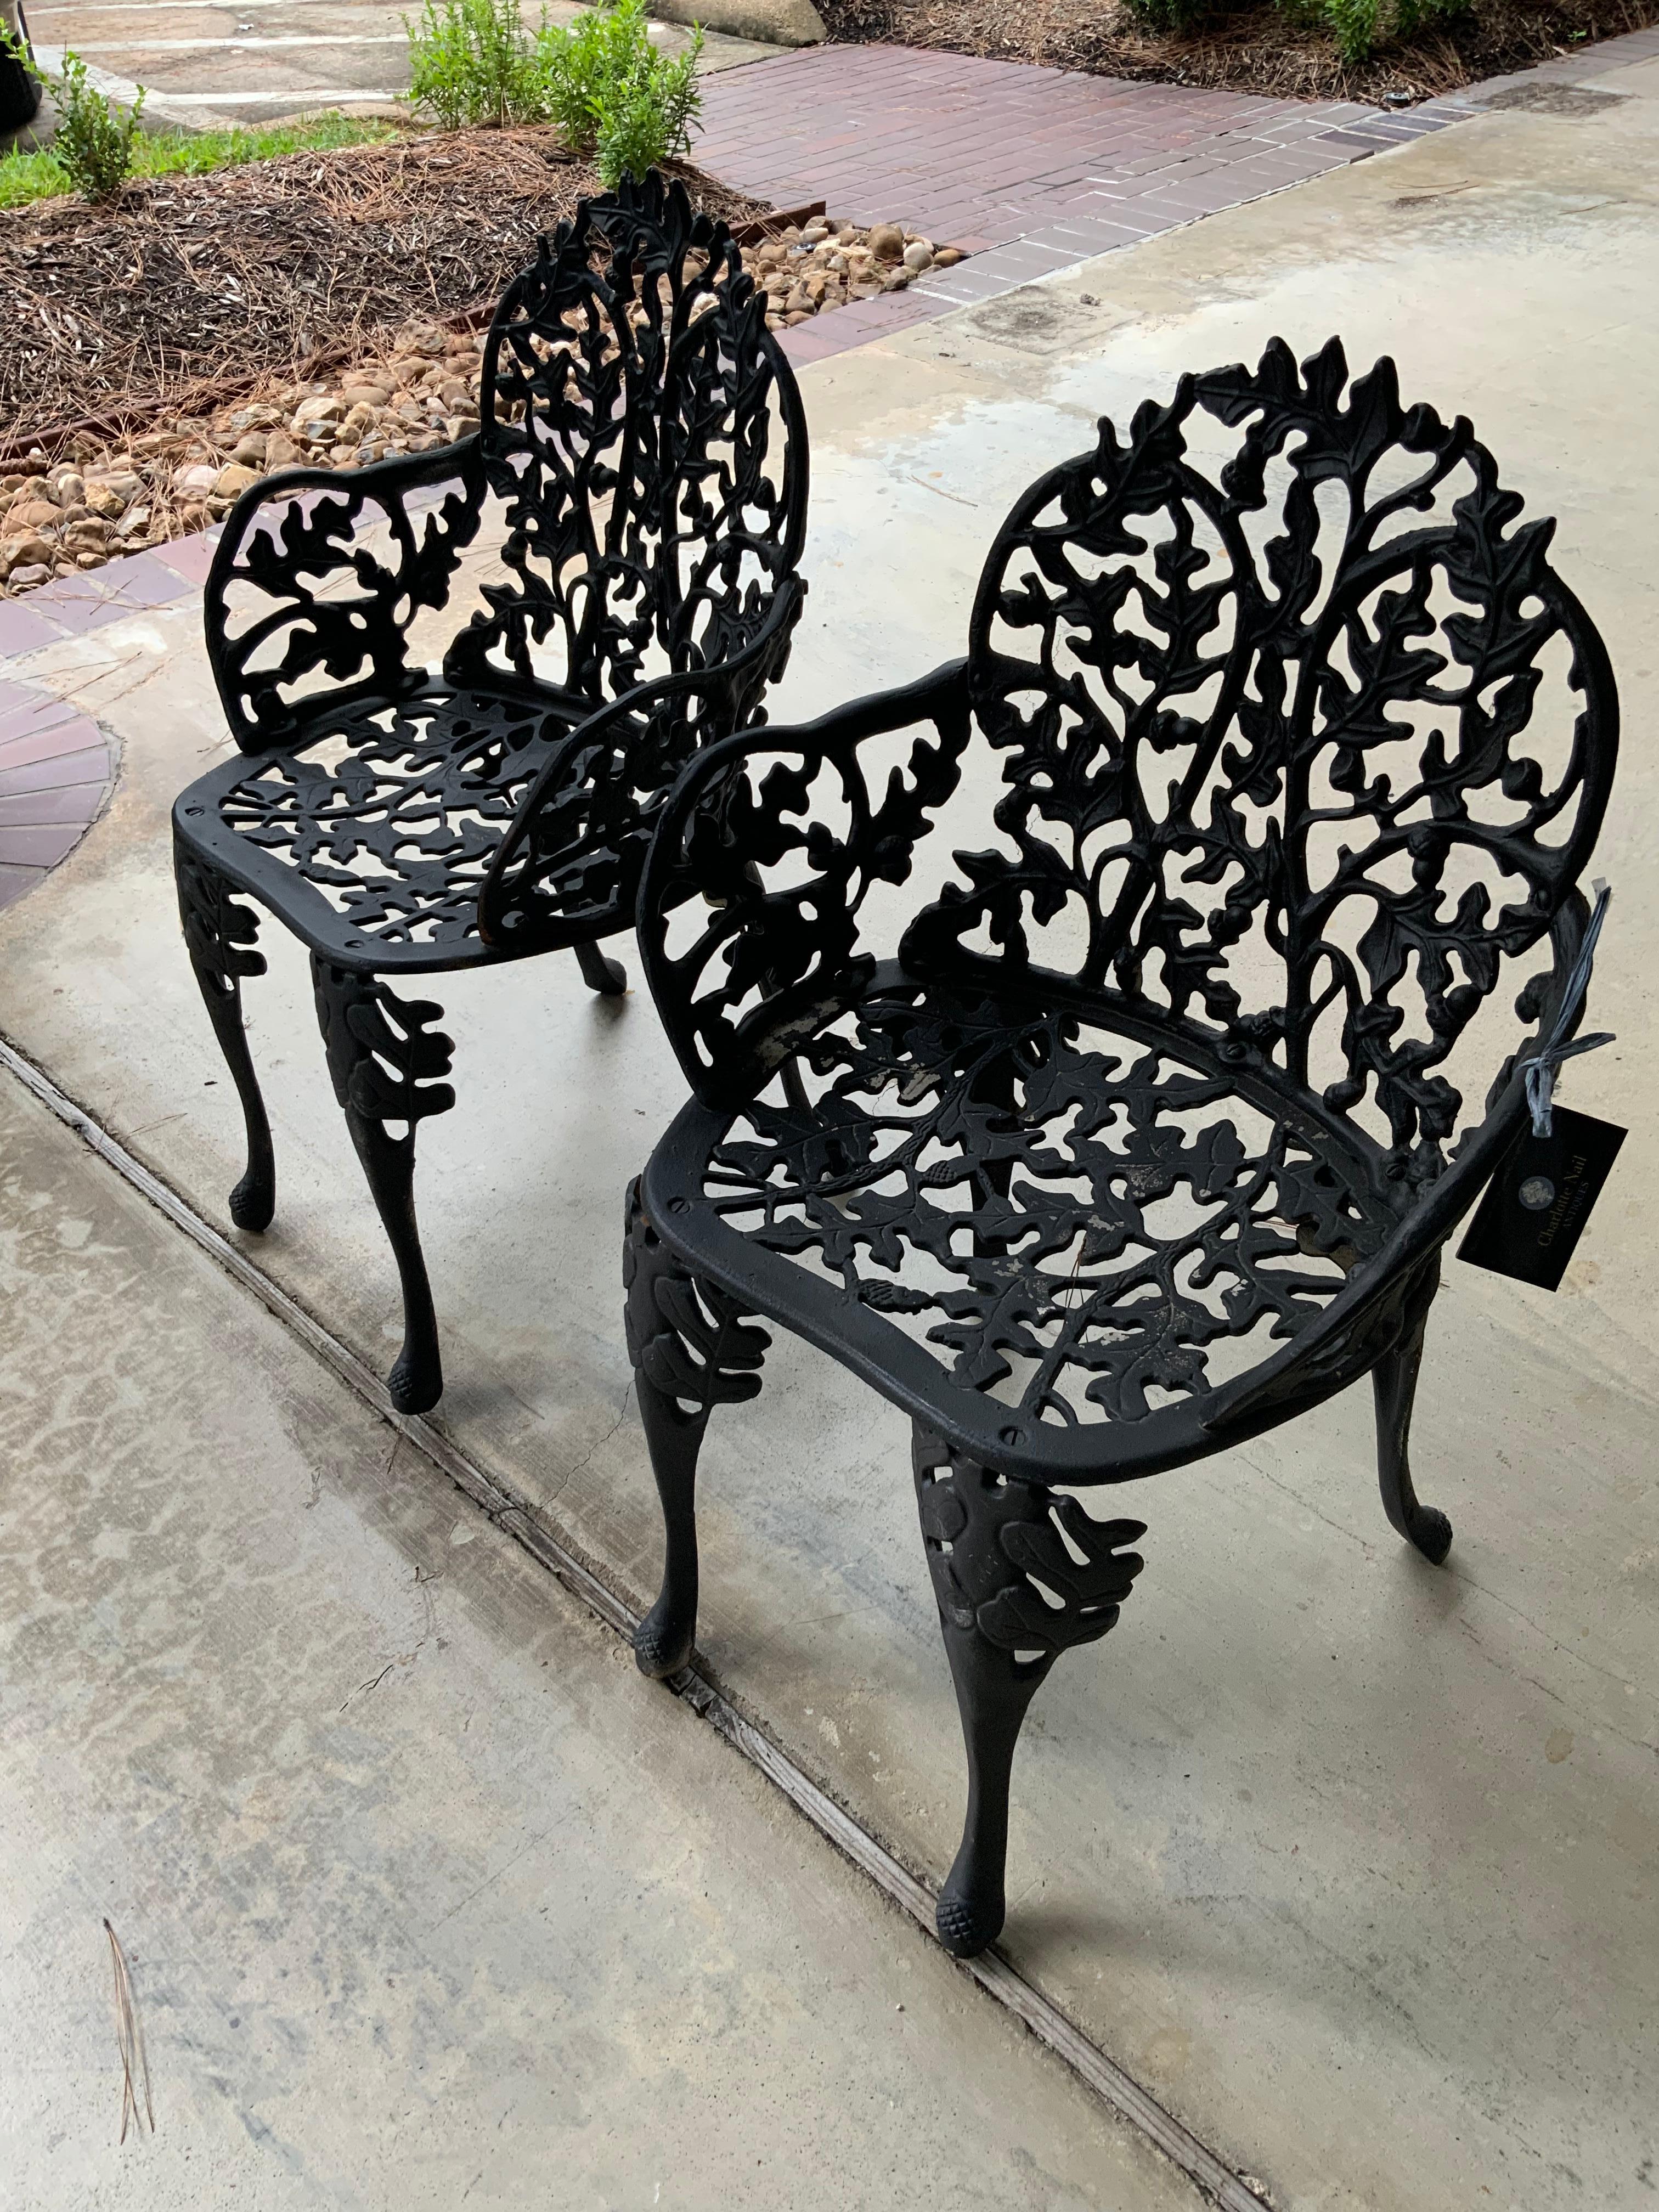 Garden chairs with a graceful curved back and curved leg make this pair desirable
For any garden. The pattern has acorns and foliate designs throughout the design.